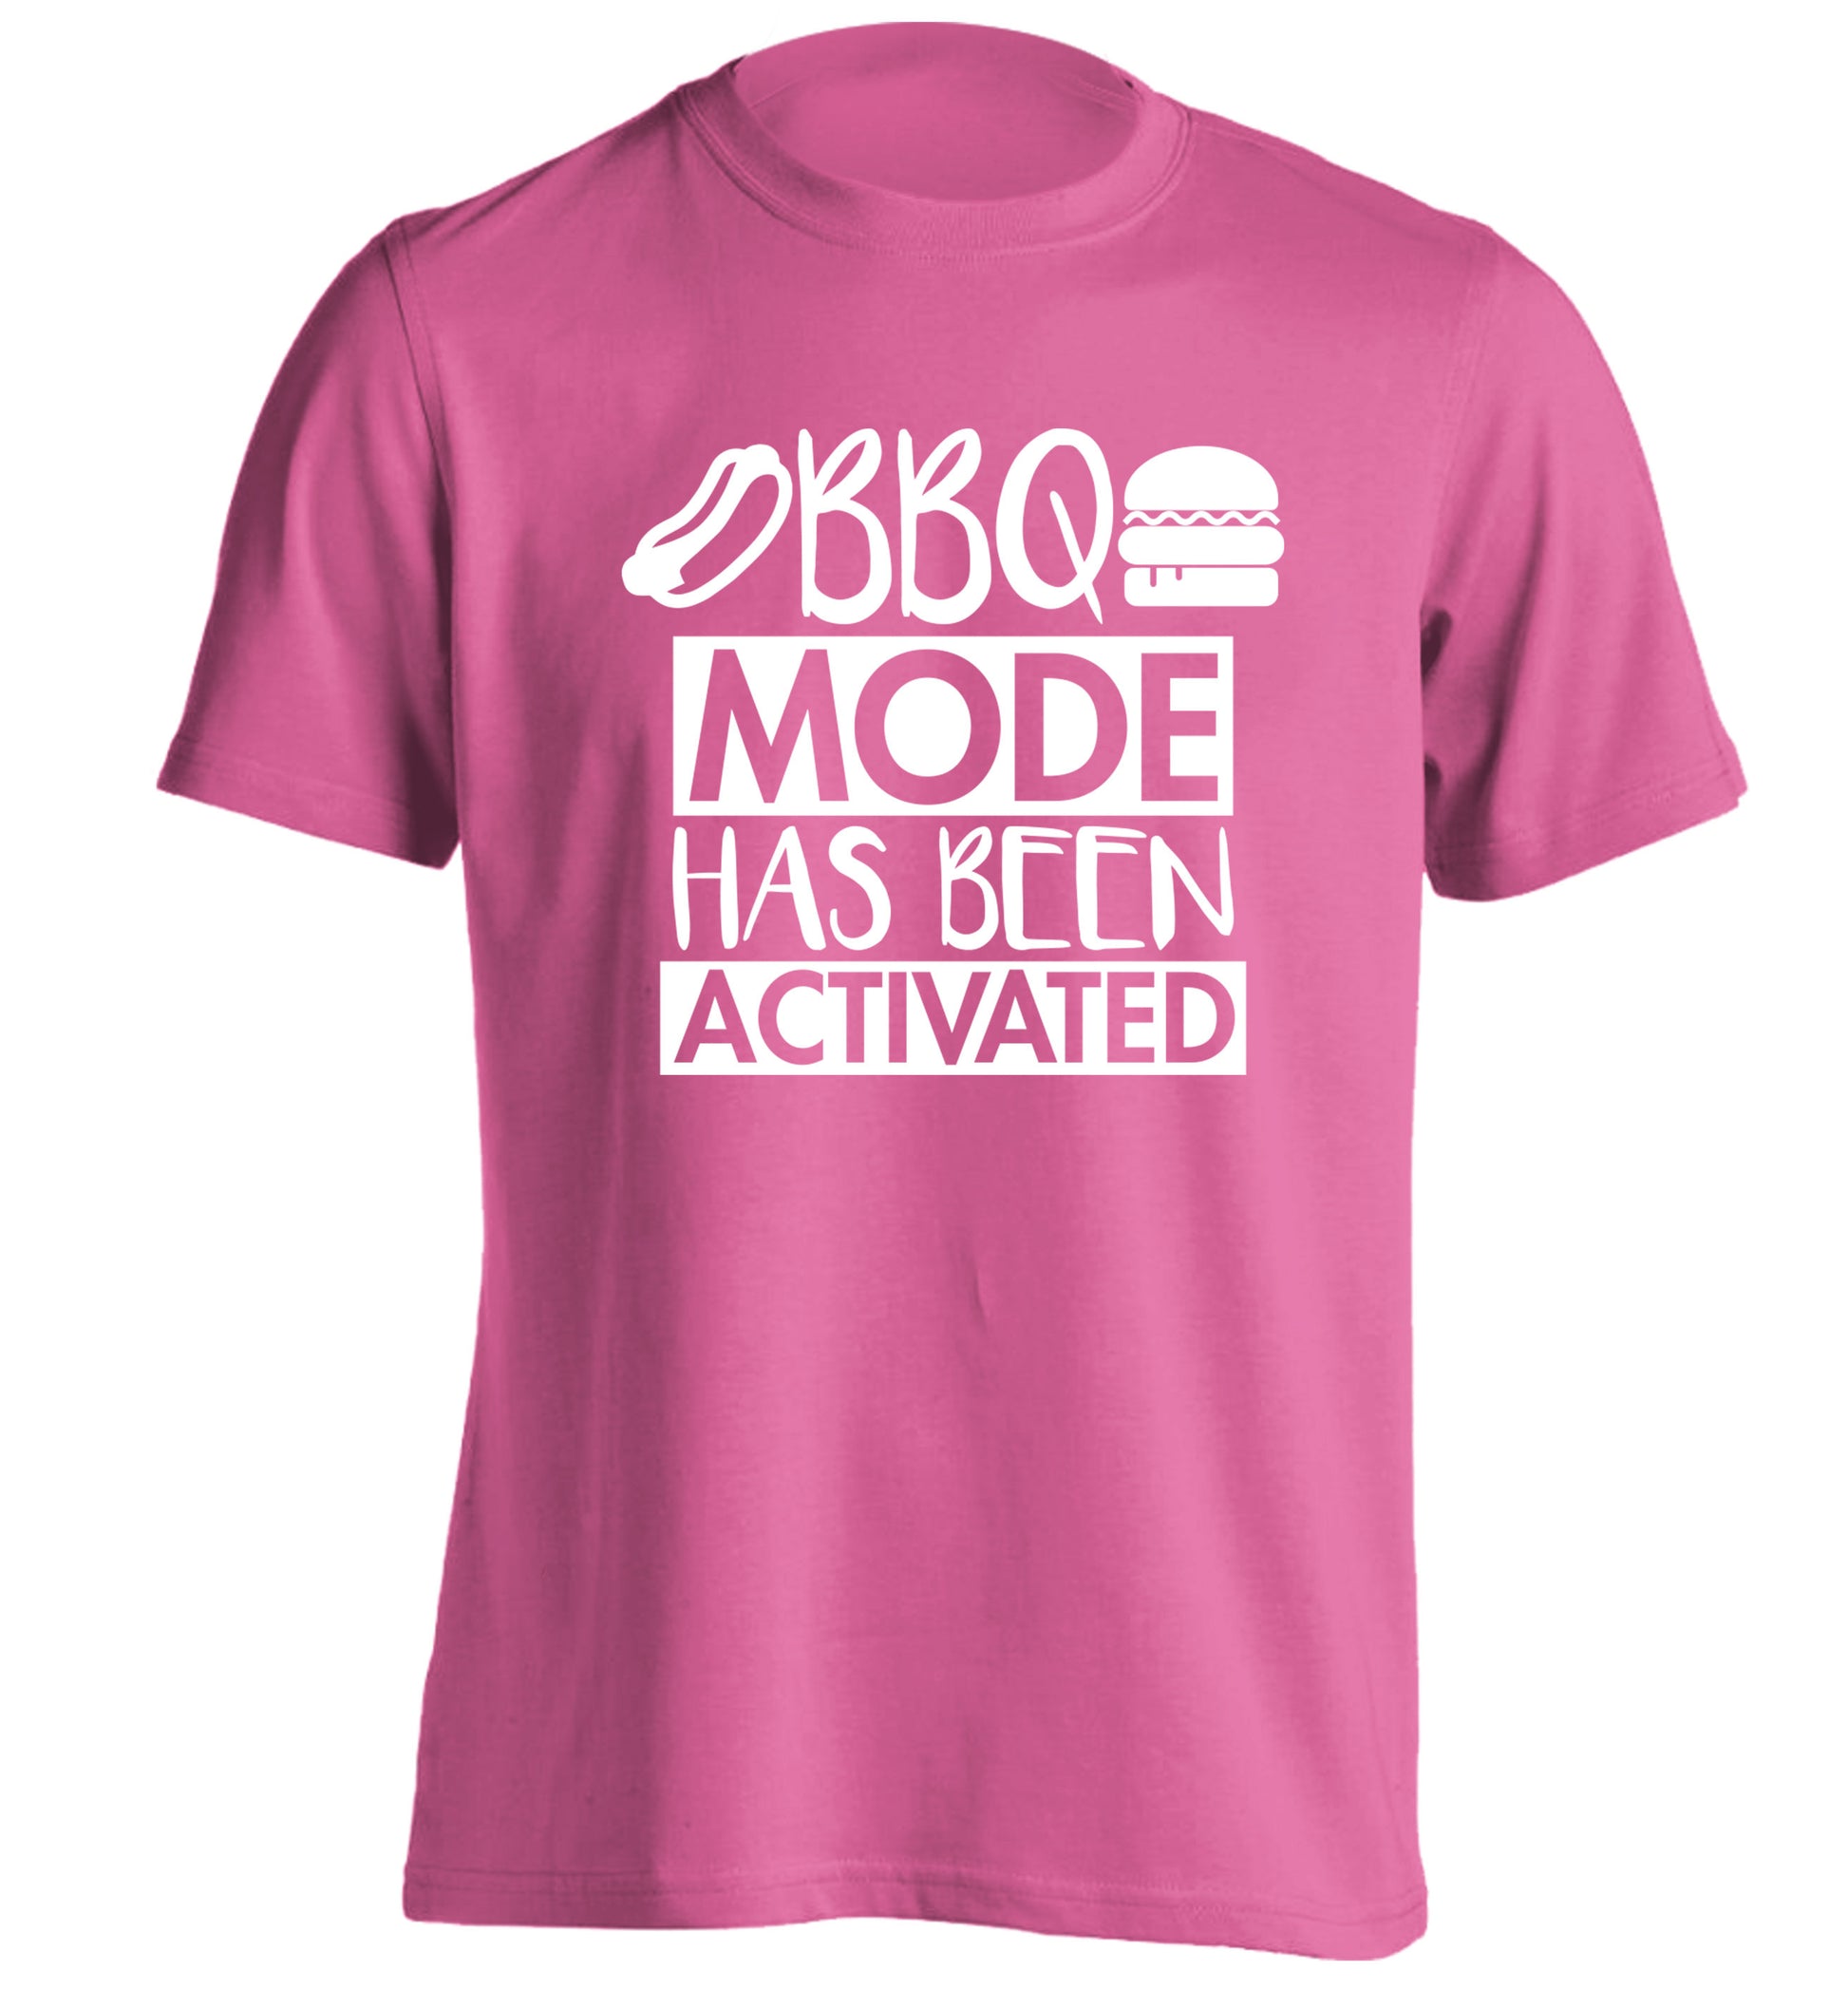 Bbq mode has been activated adults unisex pink Tshirt 2XL